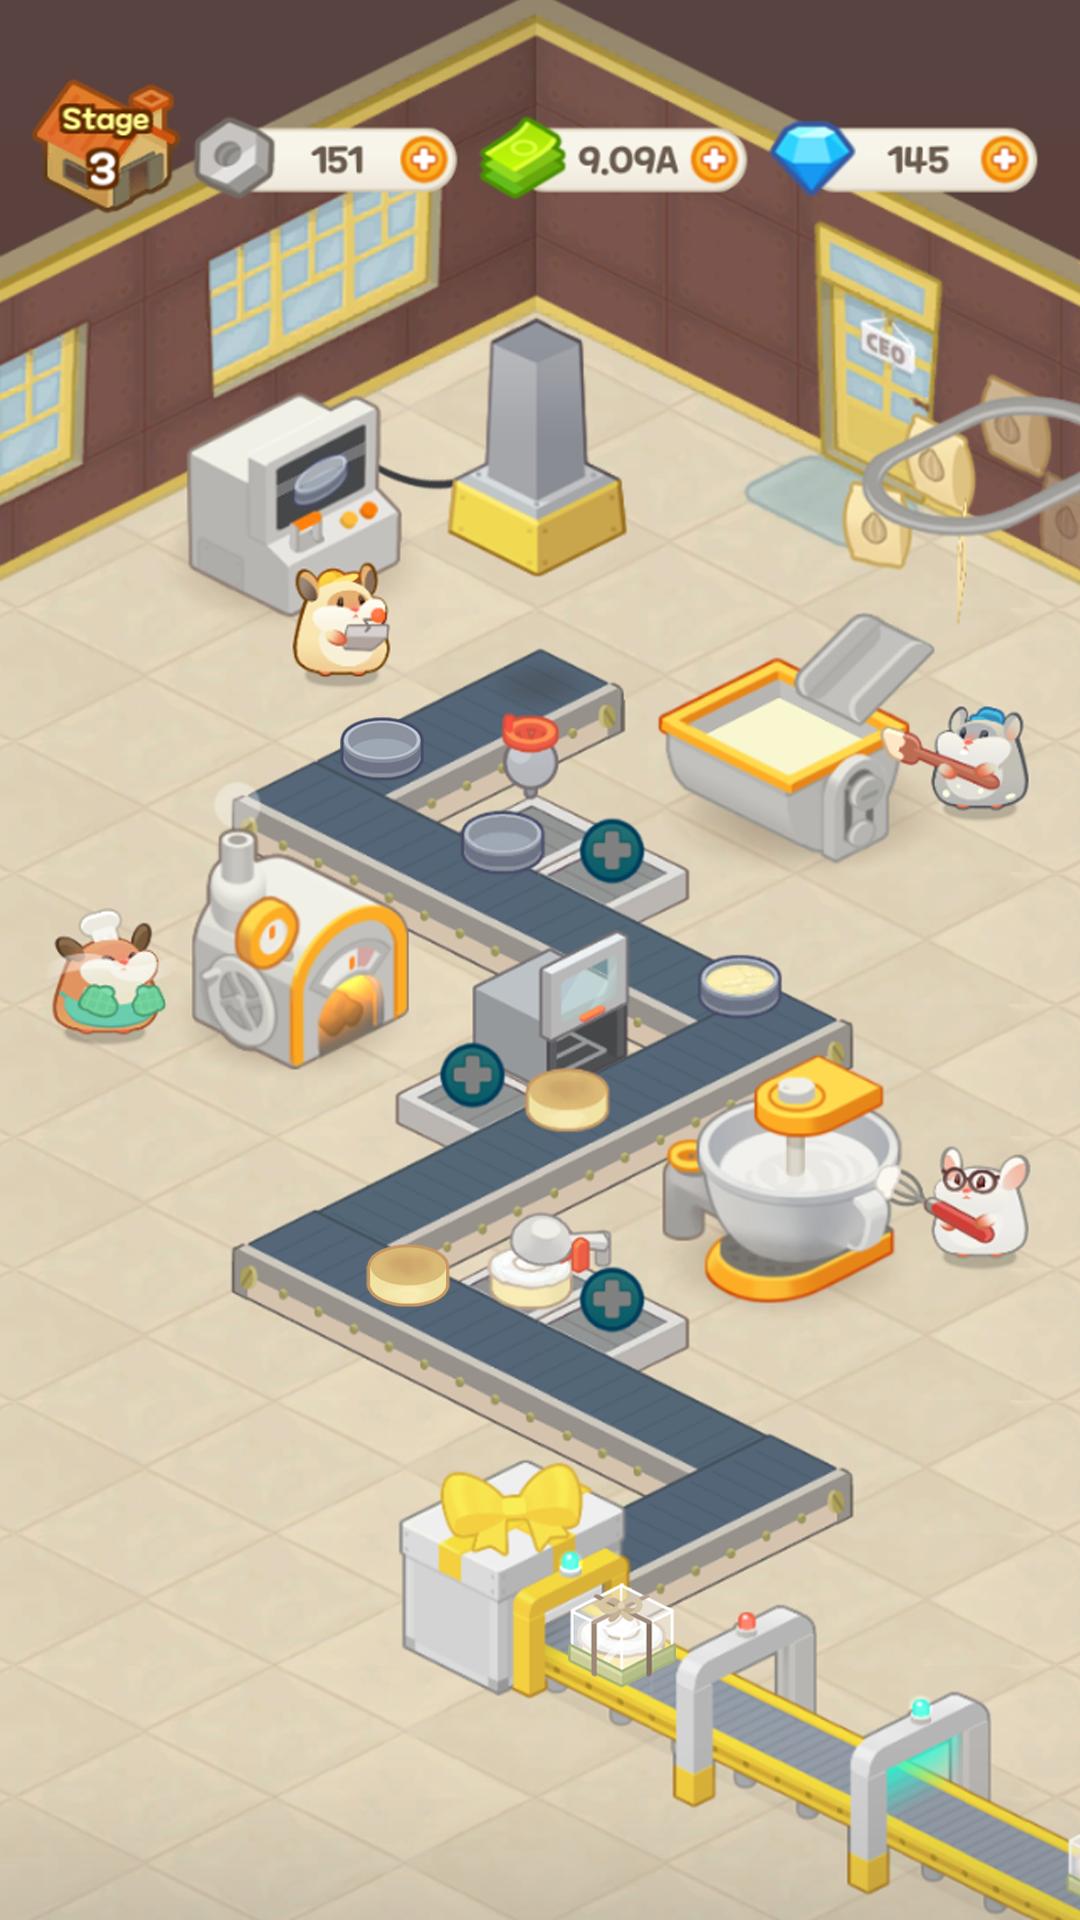 Hamster's Cake Factory - Idle Baking Manager 1.0.2 Screenshot 5